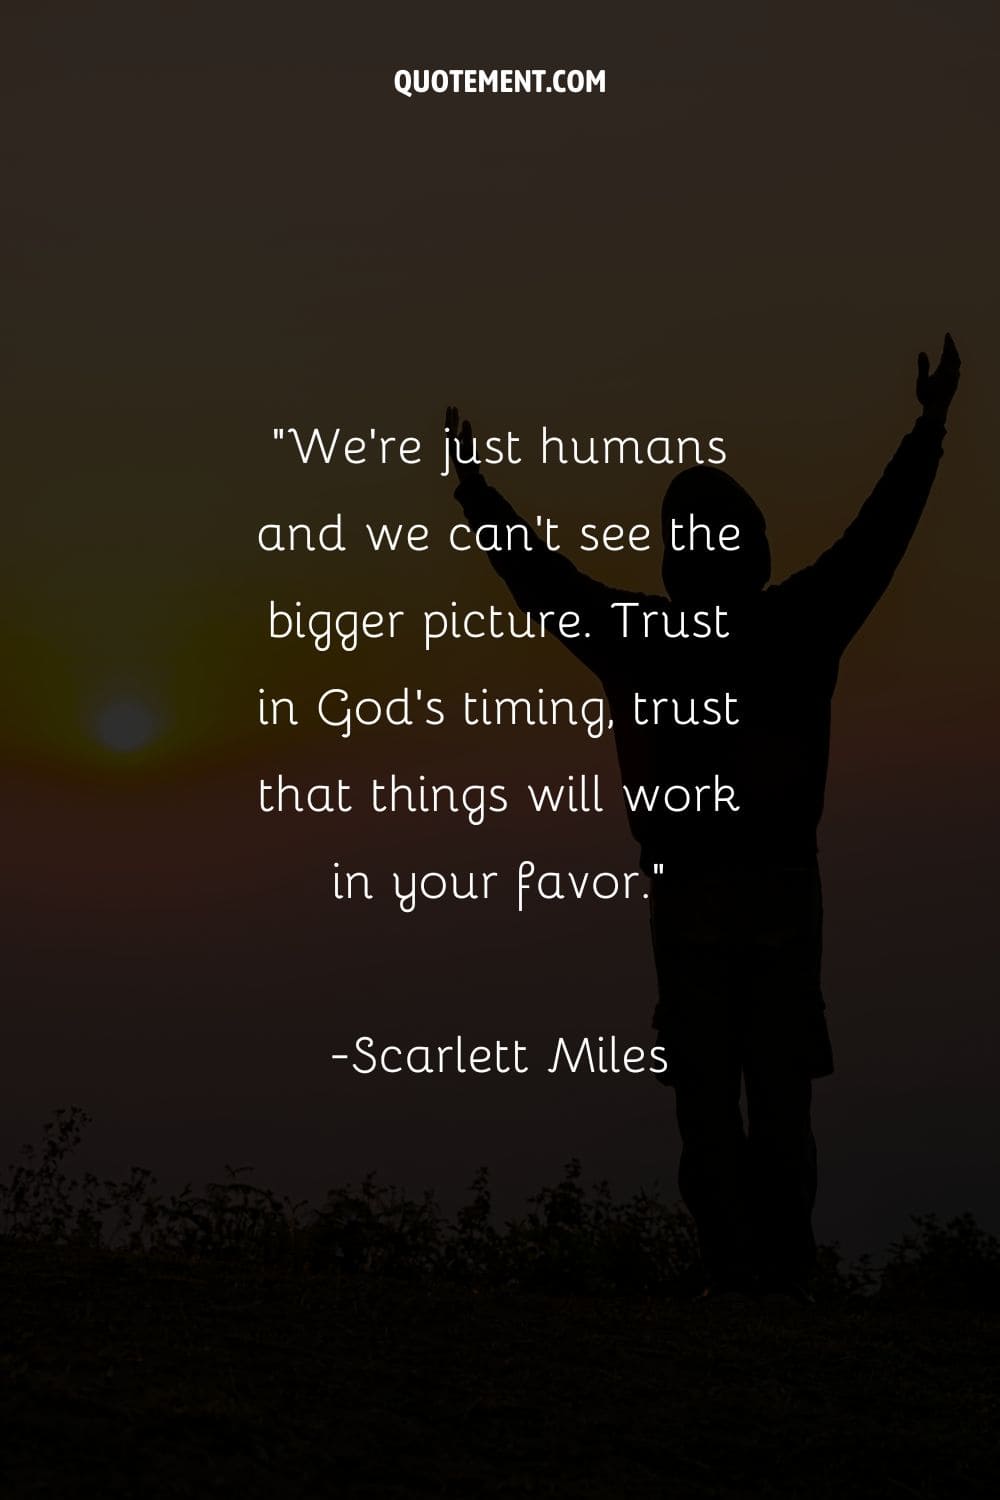 Image of an enigmatic silhouette standing tall representing quote on trust.